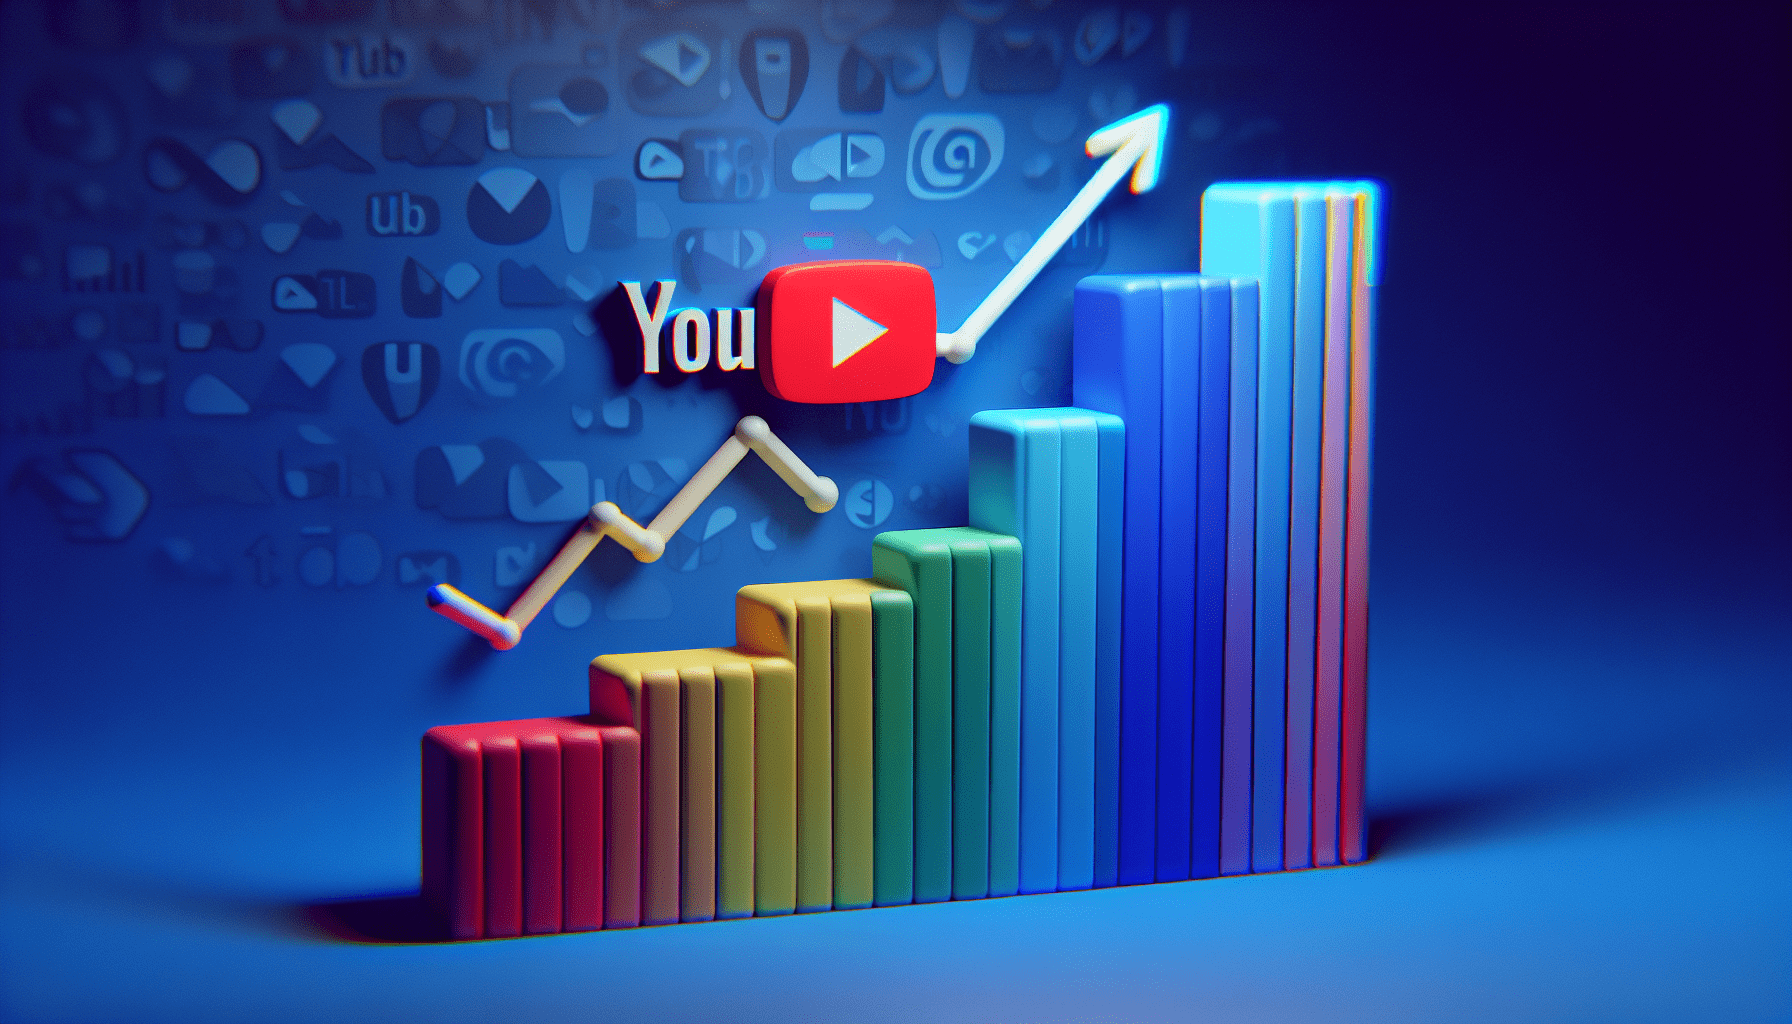 YouTube Financial Performance